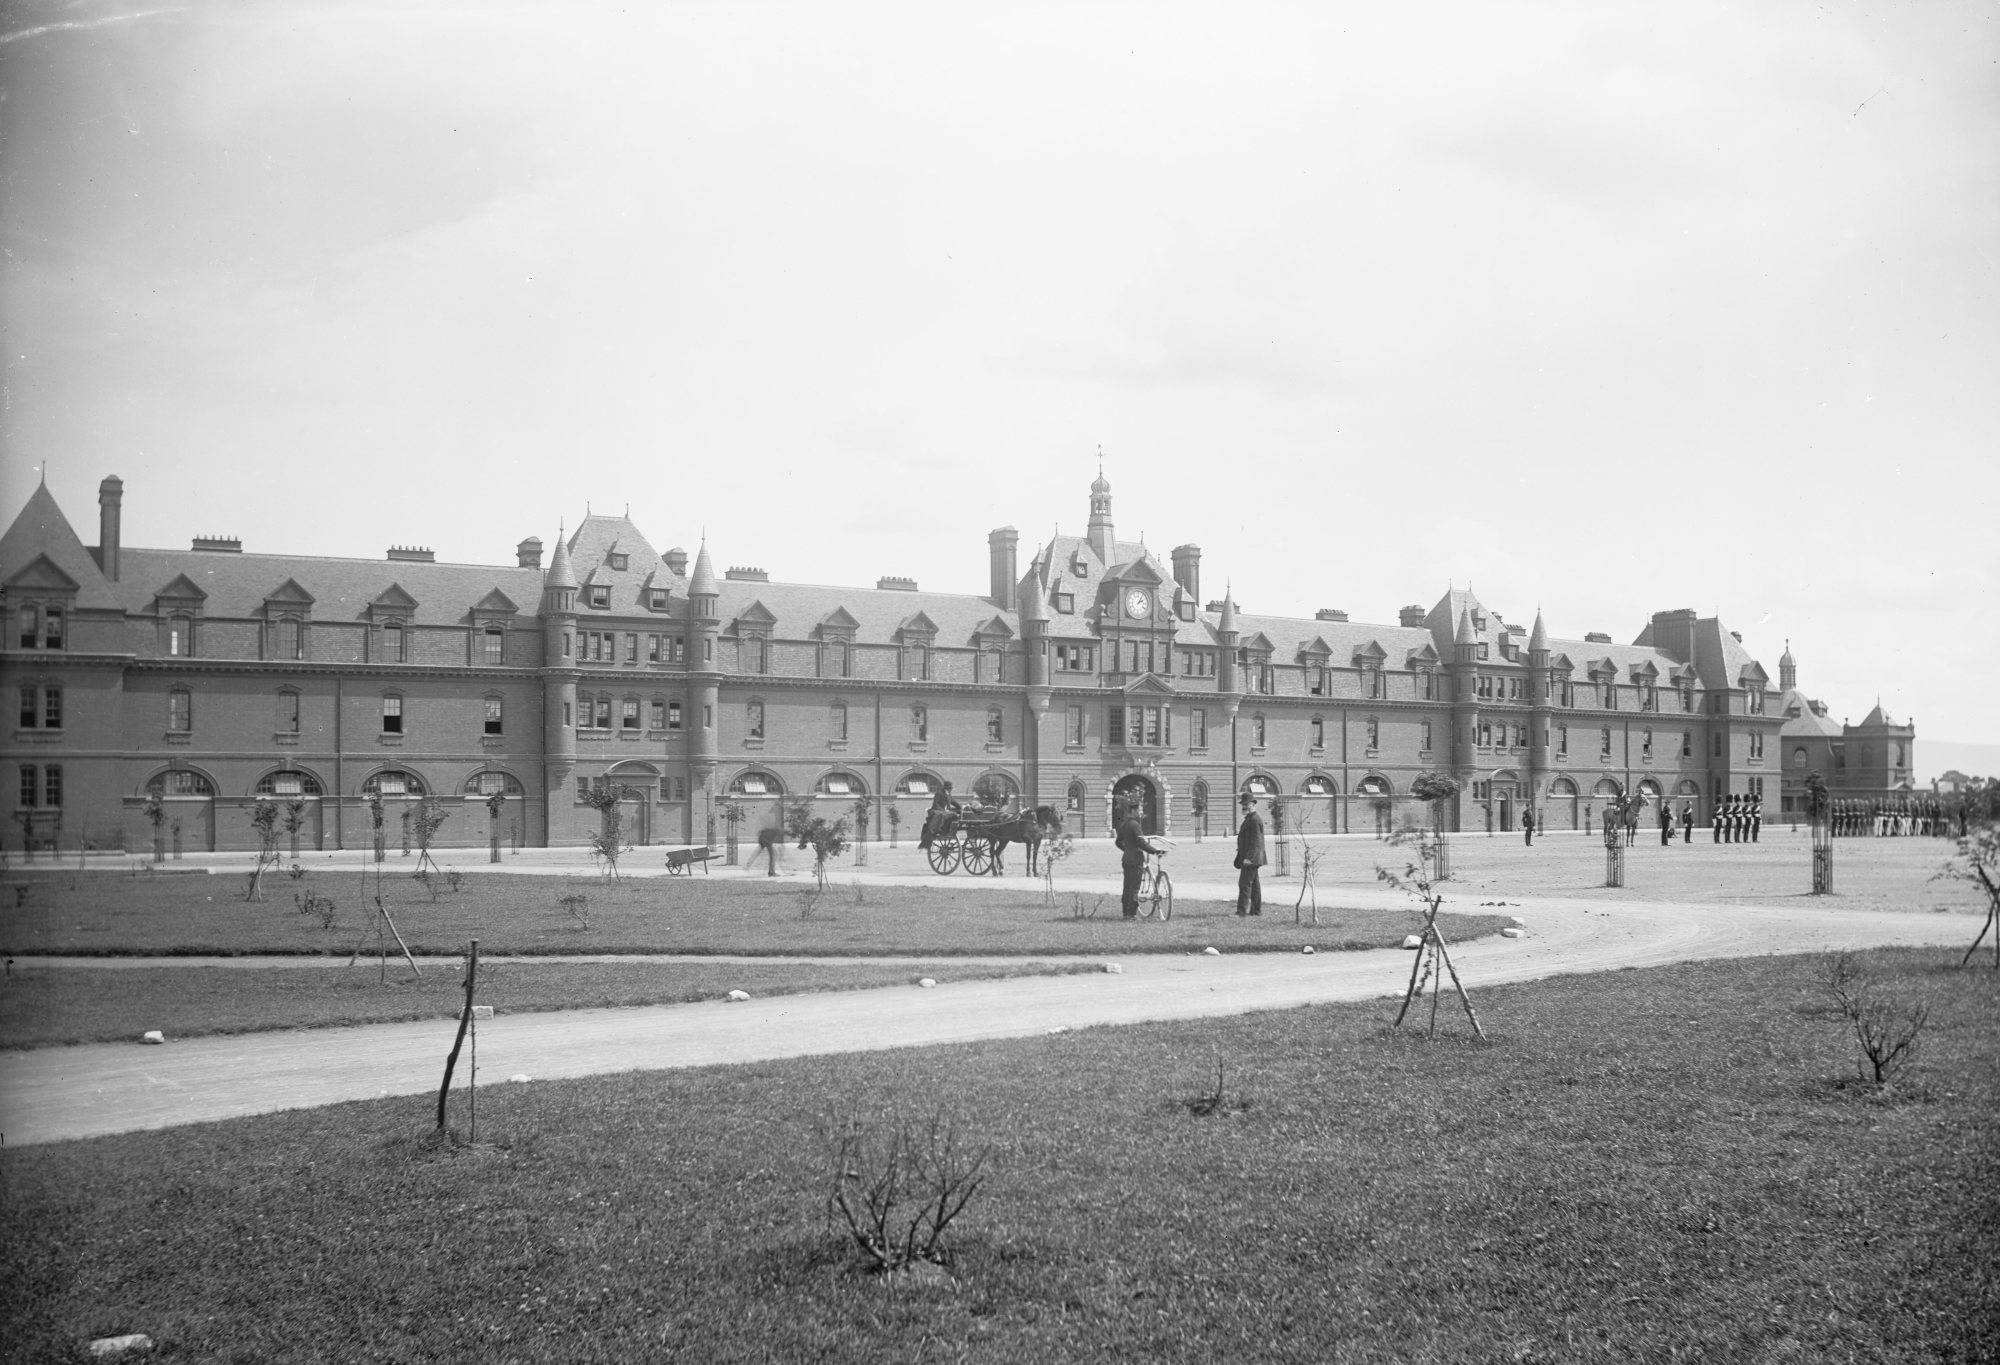 Part of the Lawrence Collection, Robert French probably took this image of Marlborough Barracks (now McKee Barracks) around 1900. National Library of Ireland. 